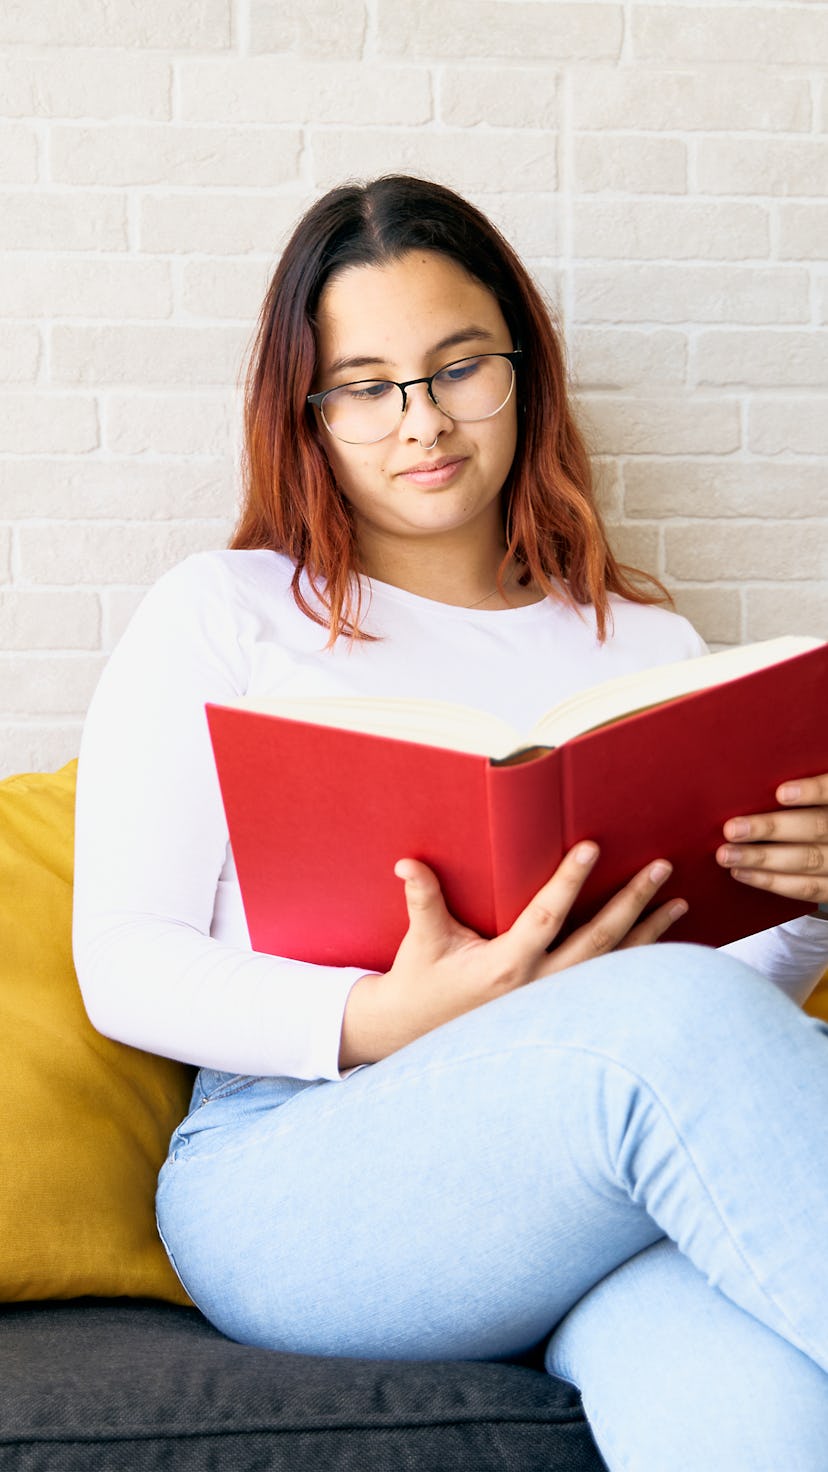 Beautiful teenage girl enjoying reading red book at home sitting on sofa with yellow cushions. She h...